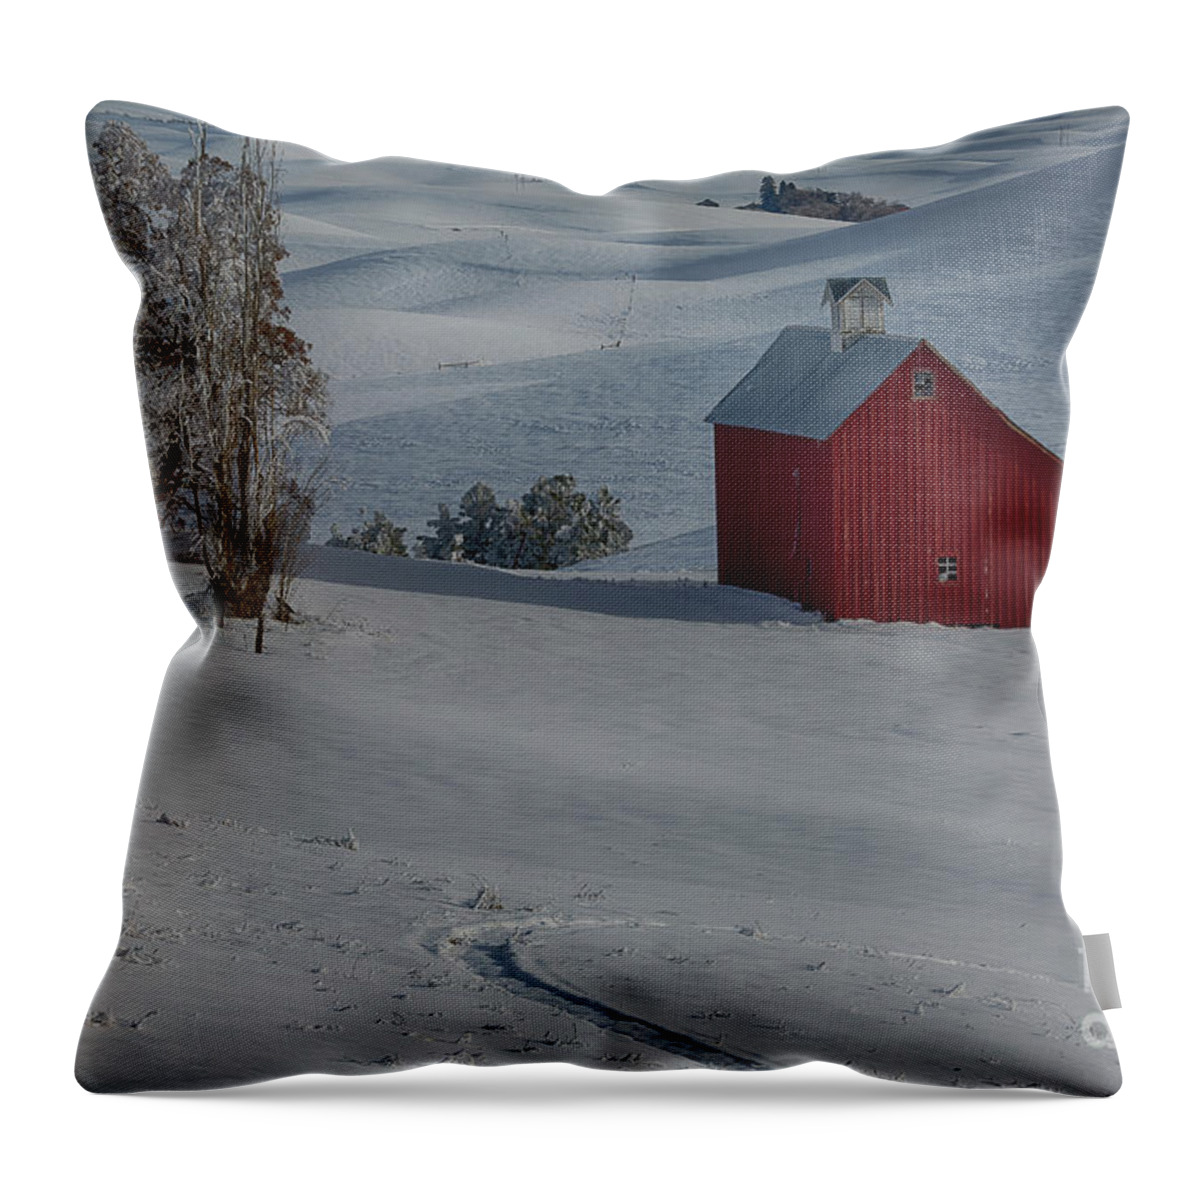 Idaho Throw Pillow featuring the photograph Palouse Saltbox Barn Winter by Idaho Scenic Images Linda Lantzy